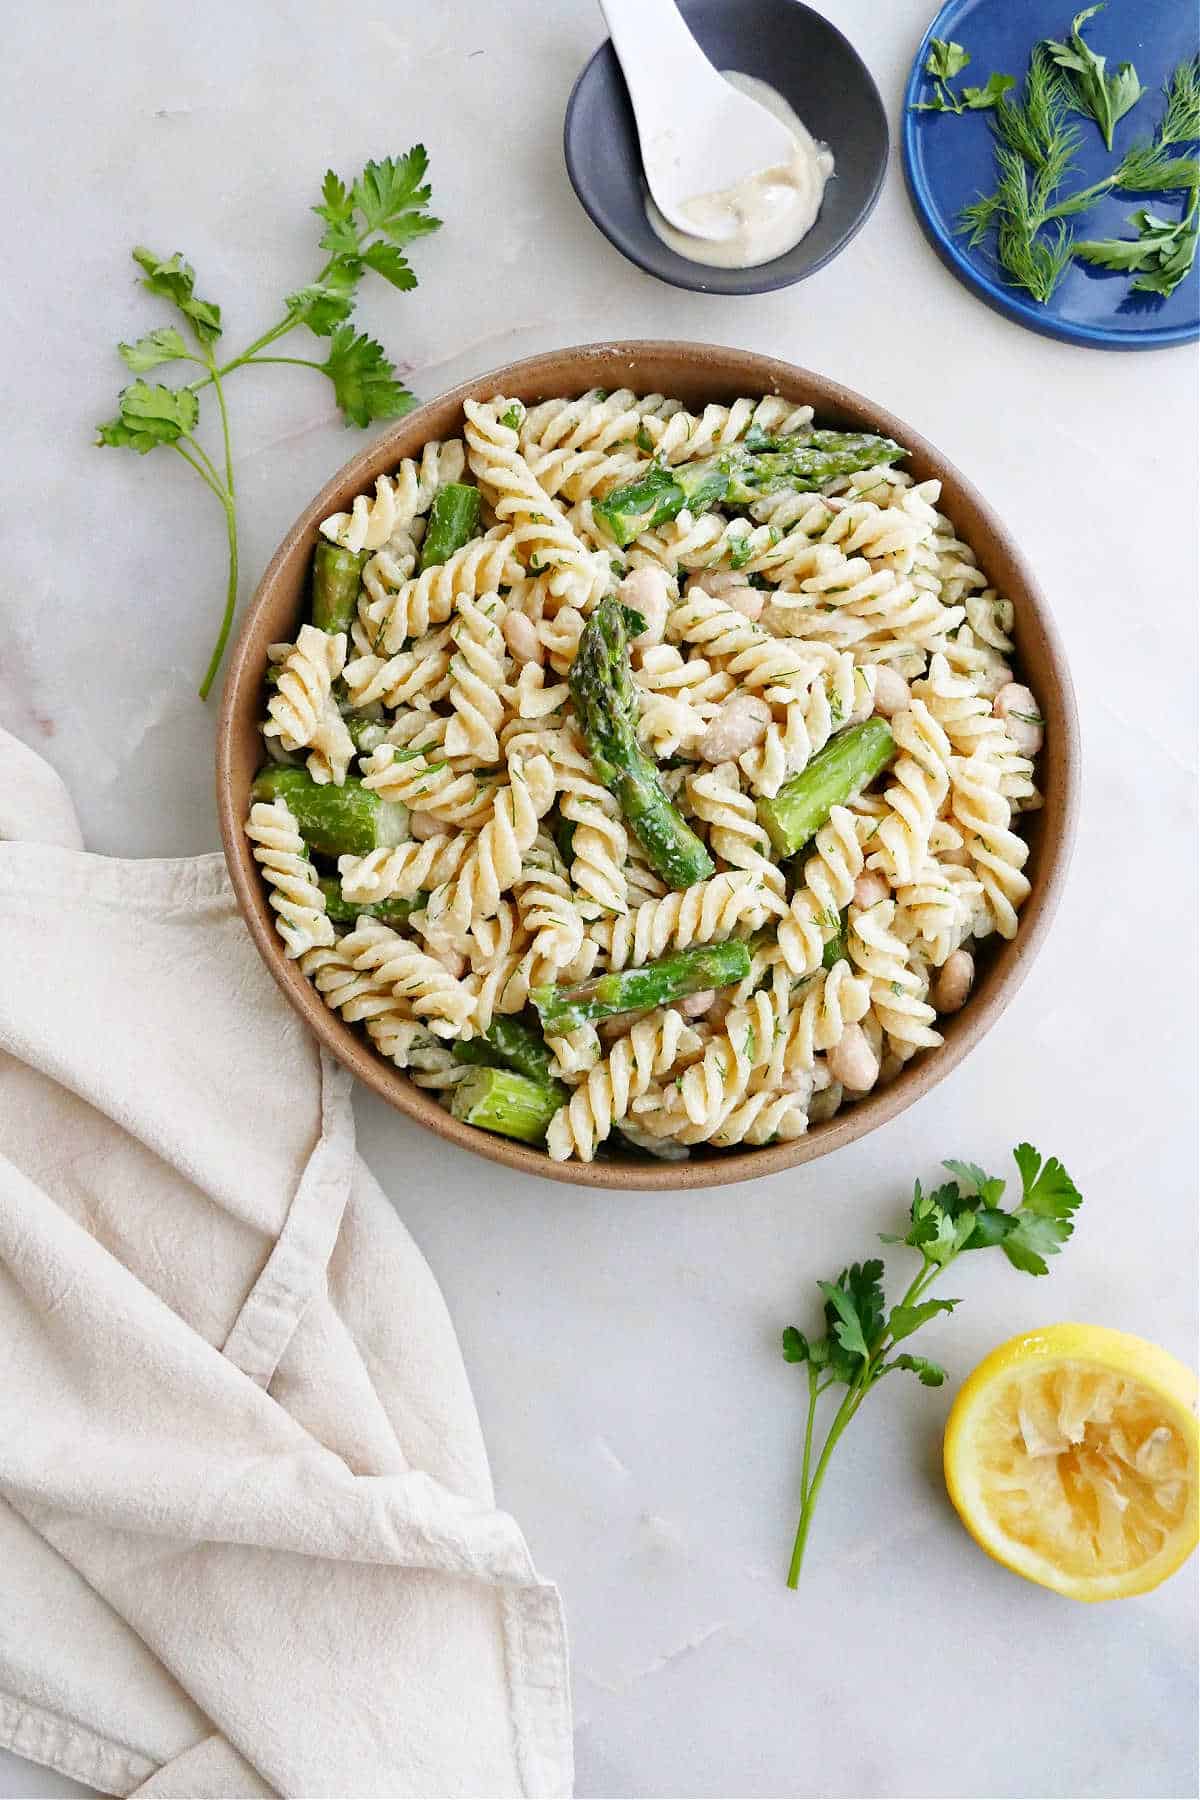 asparagus pasta salad on a serving plate next to ingredients on a counter